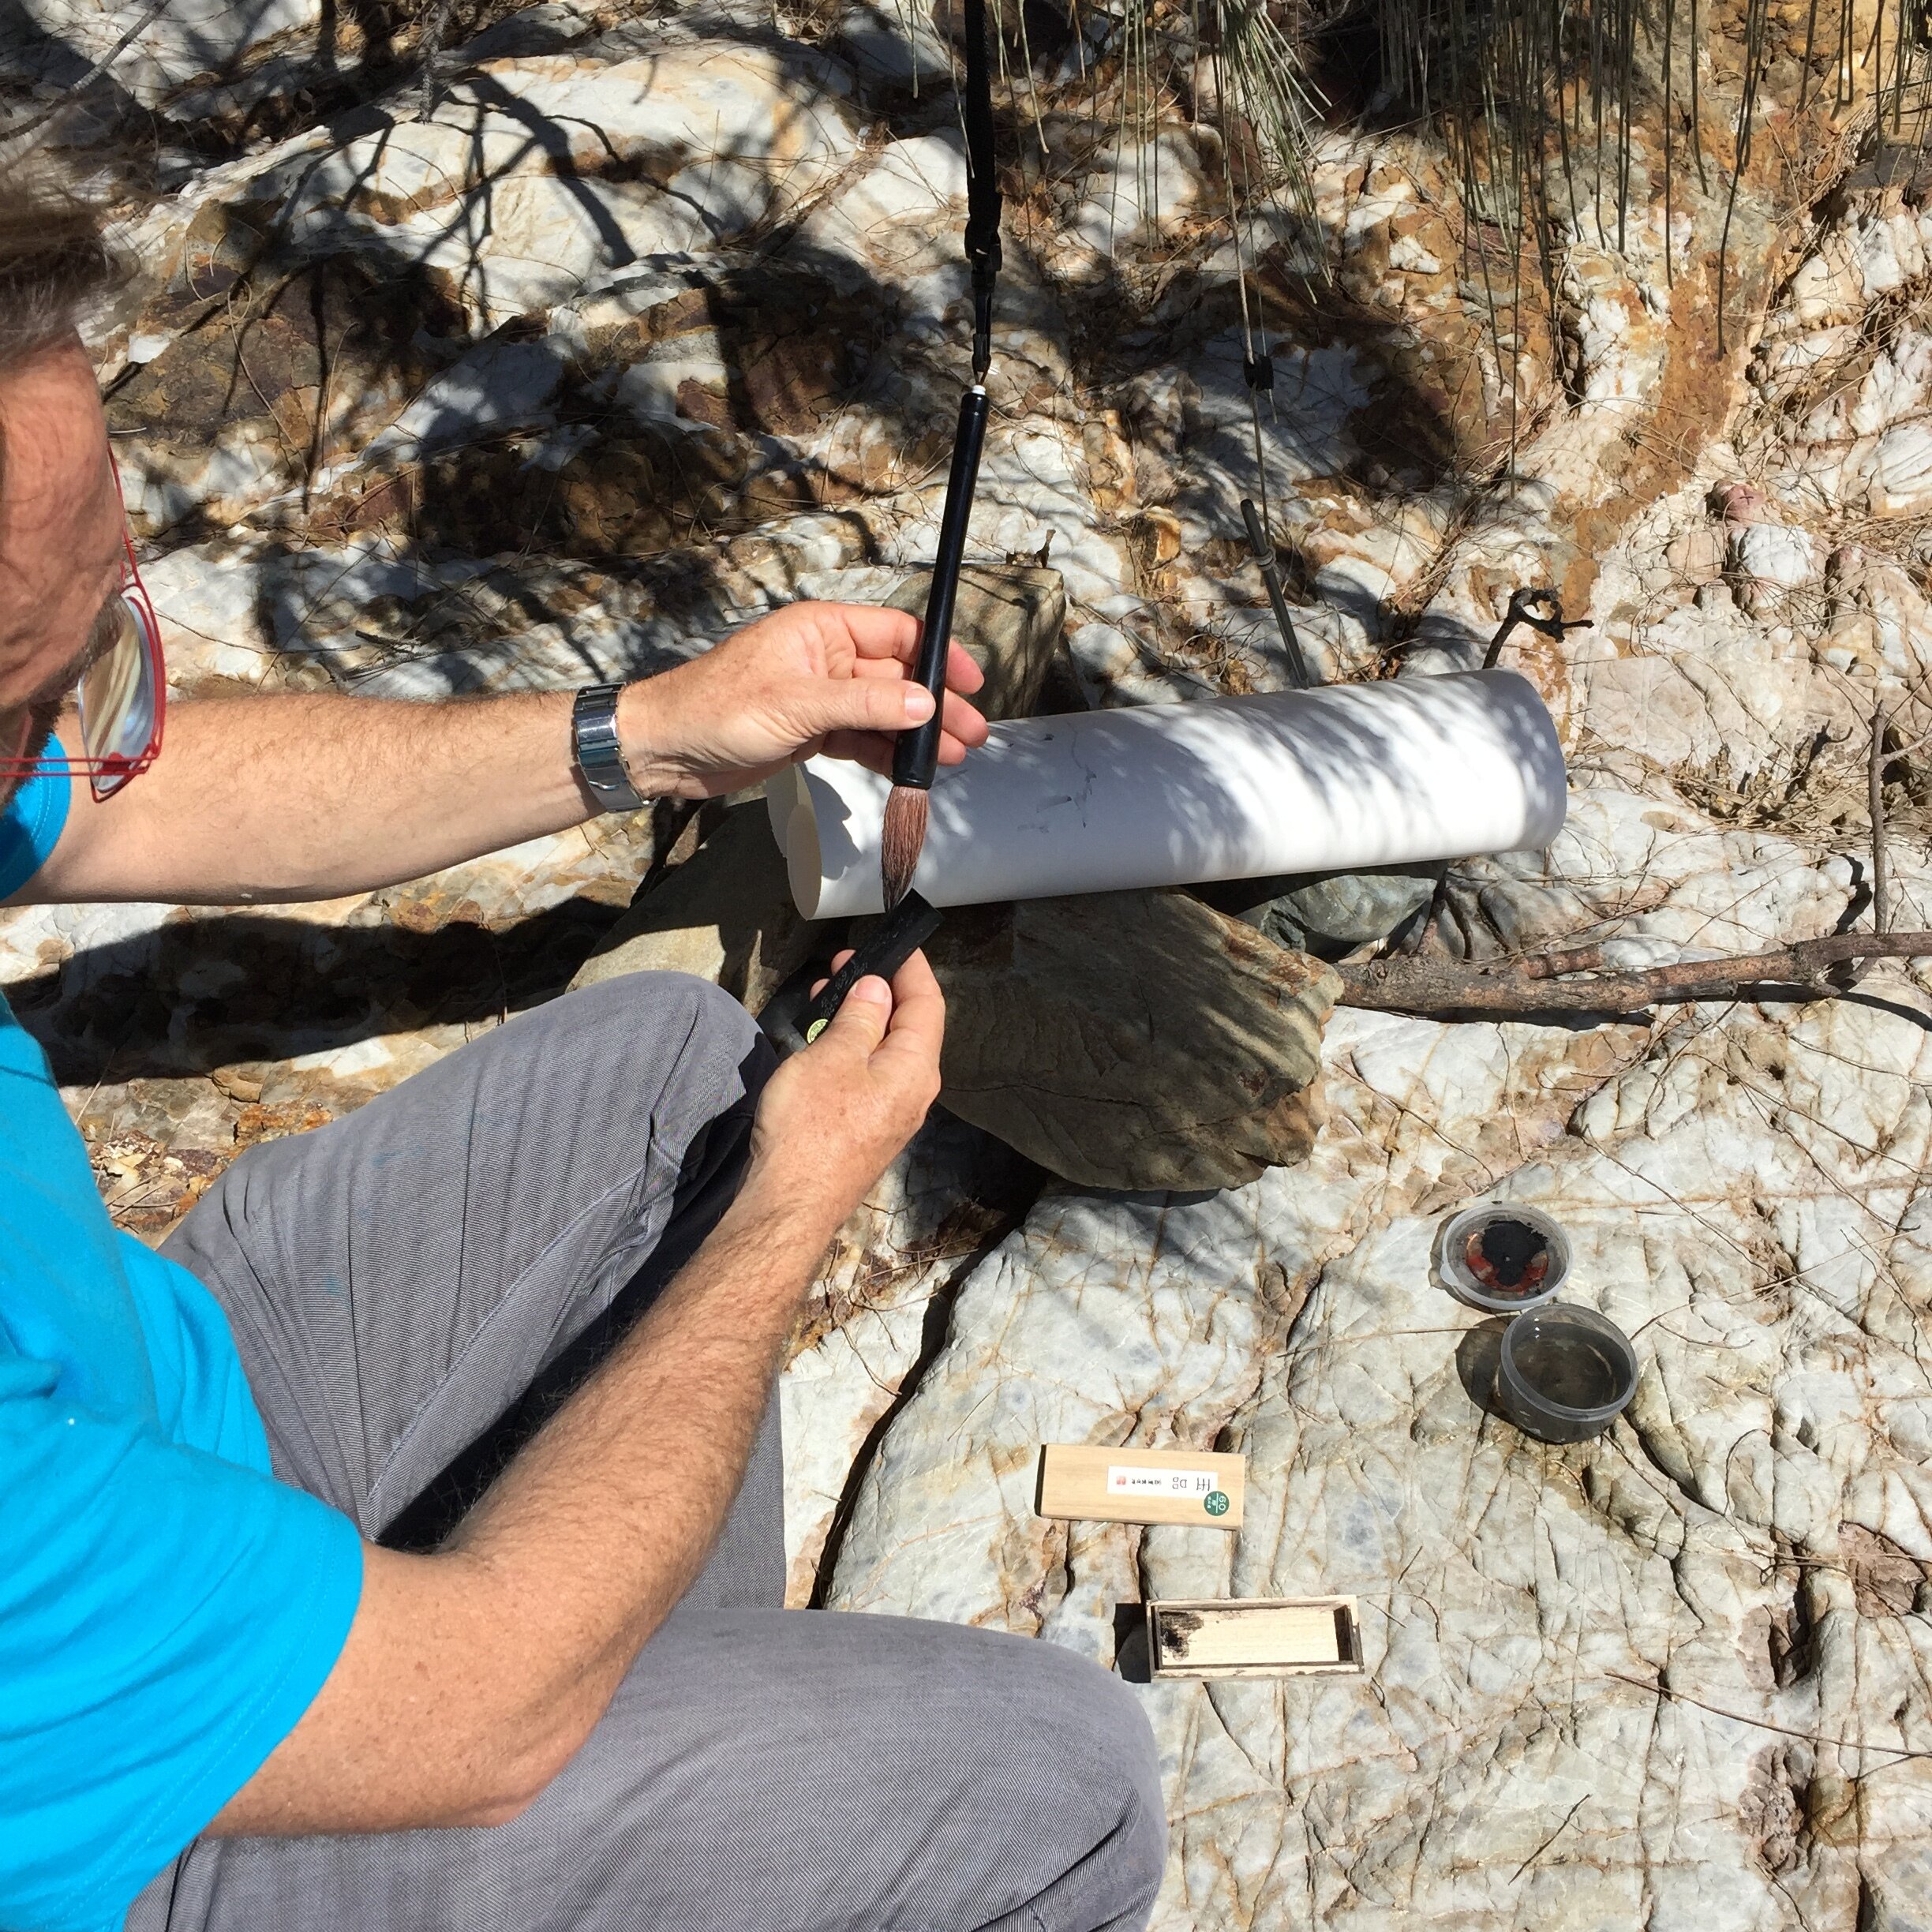  Artist Jeremy Sheehan experimenting on site at White Bluff during the projects 2019 intensive weekend workshop. 